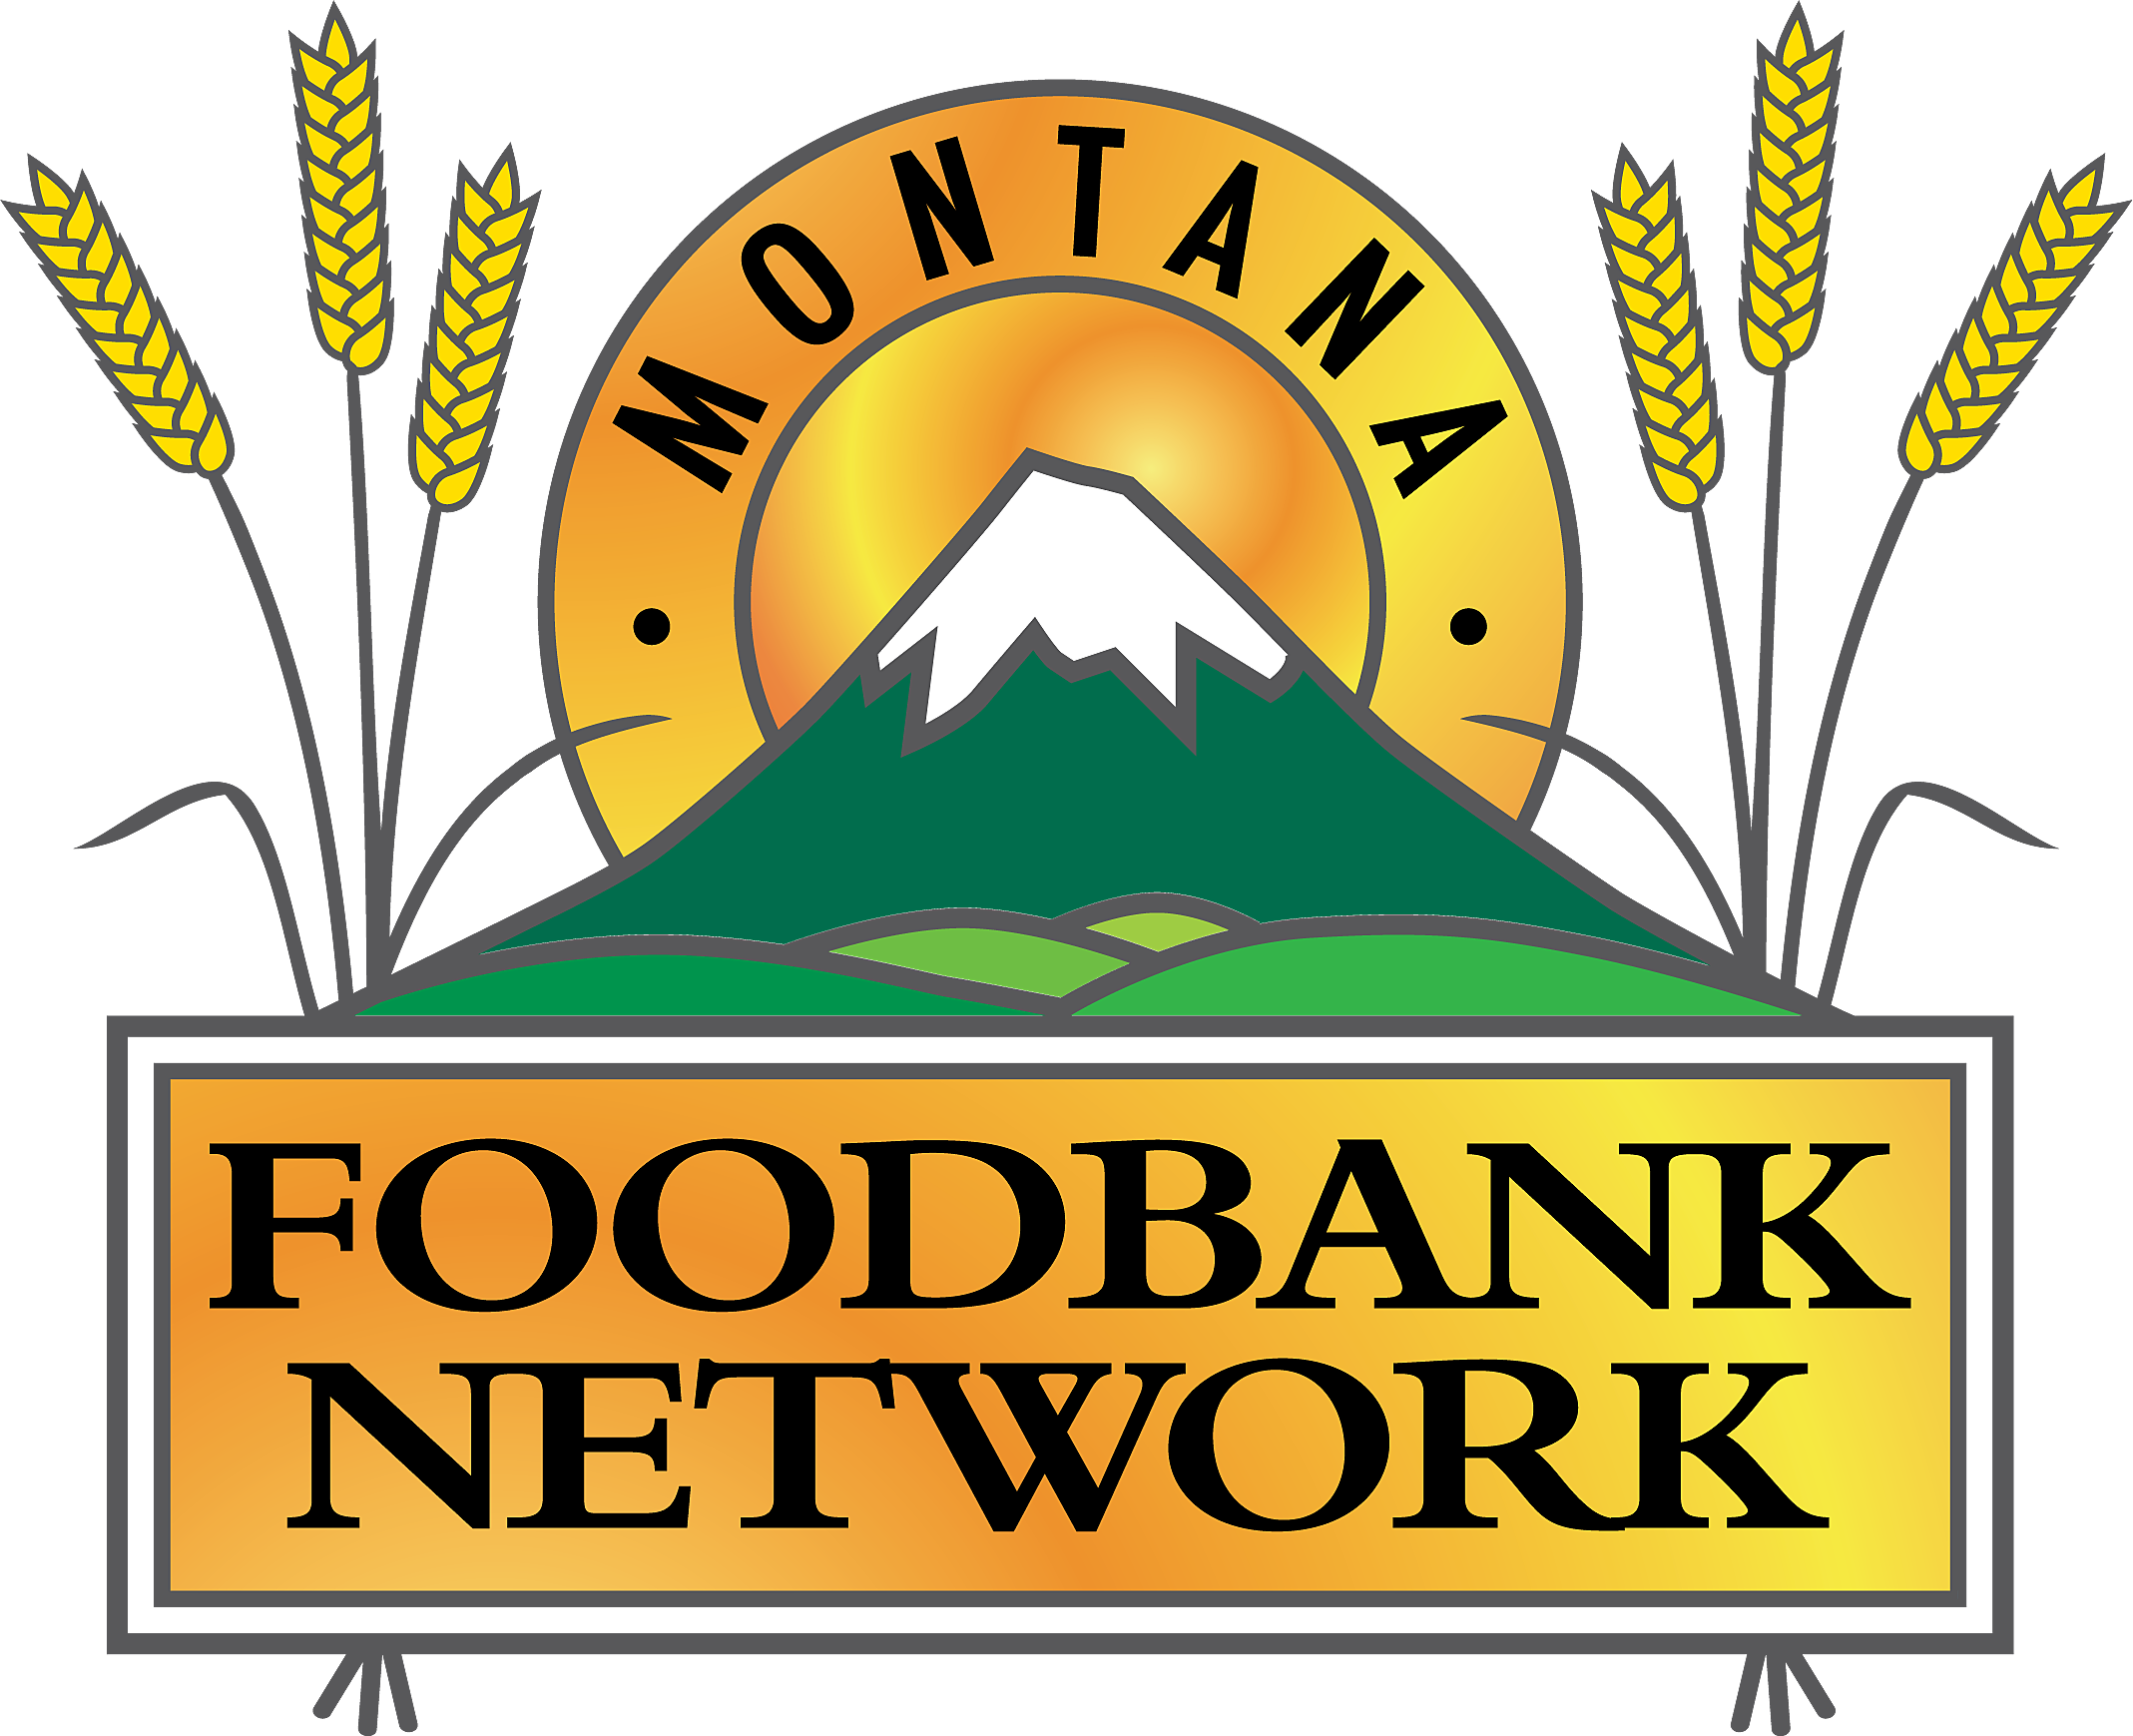 People Are Encouraged To Bring Cash Or Check Donations - Montana Food Bank Network (2137x1739)